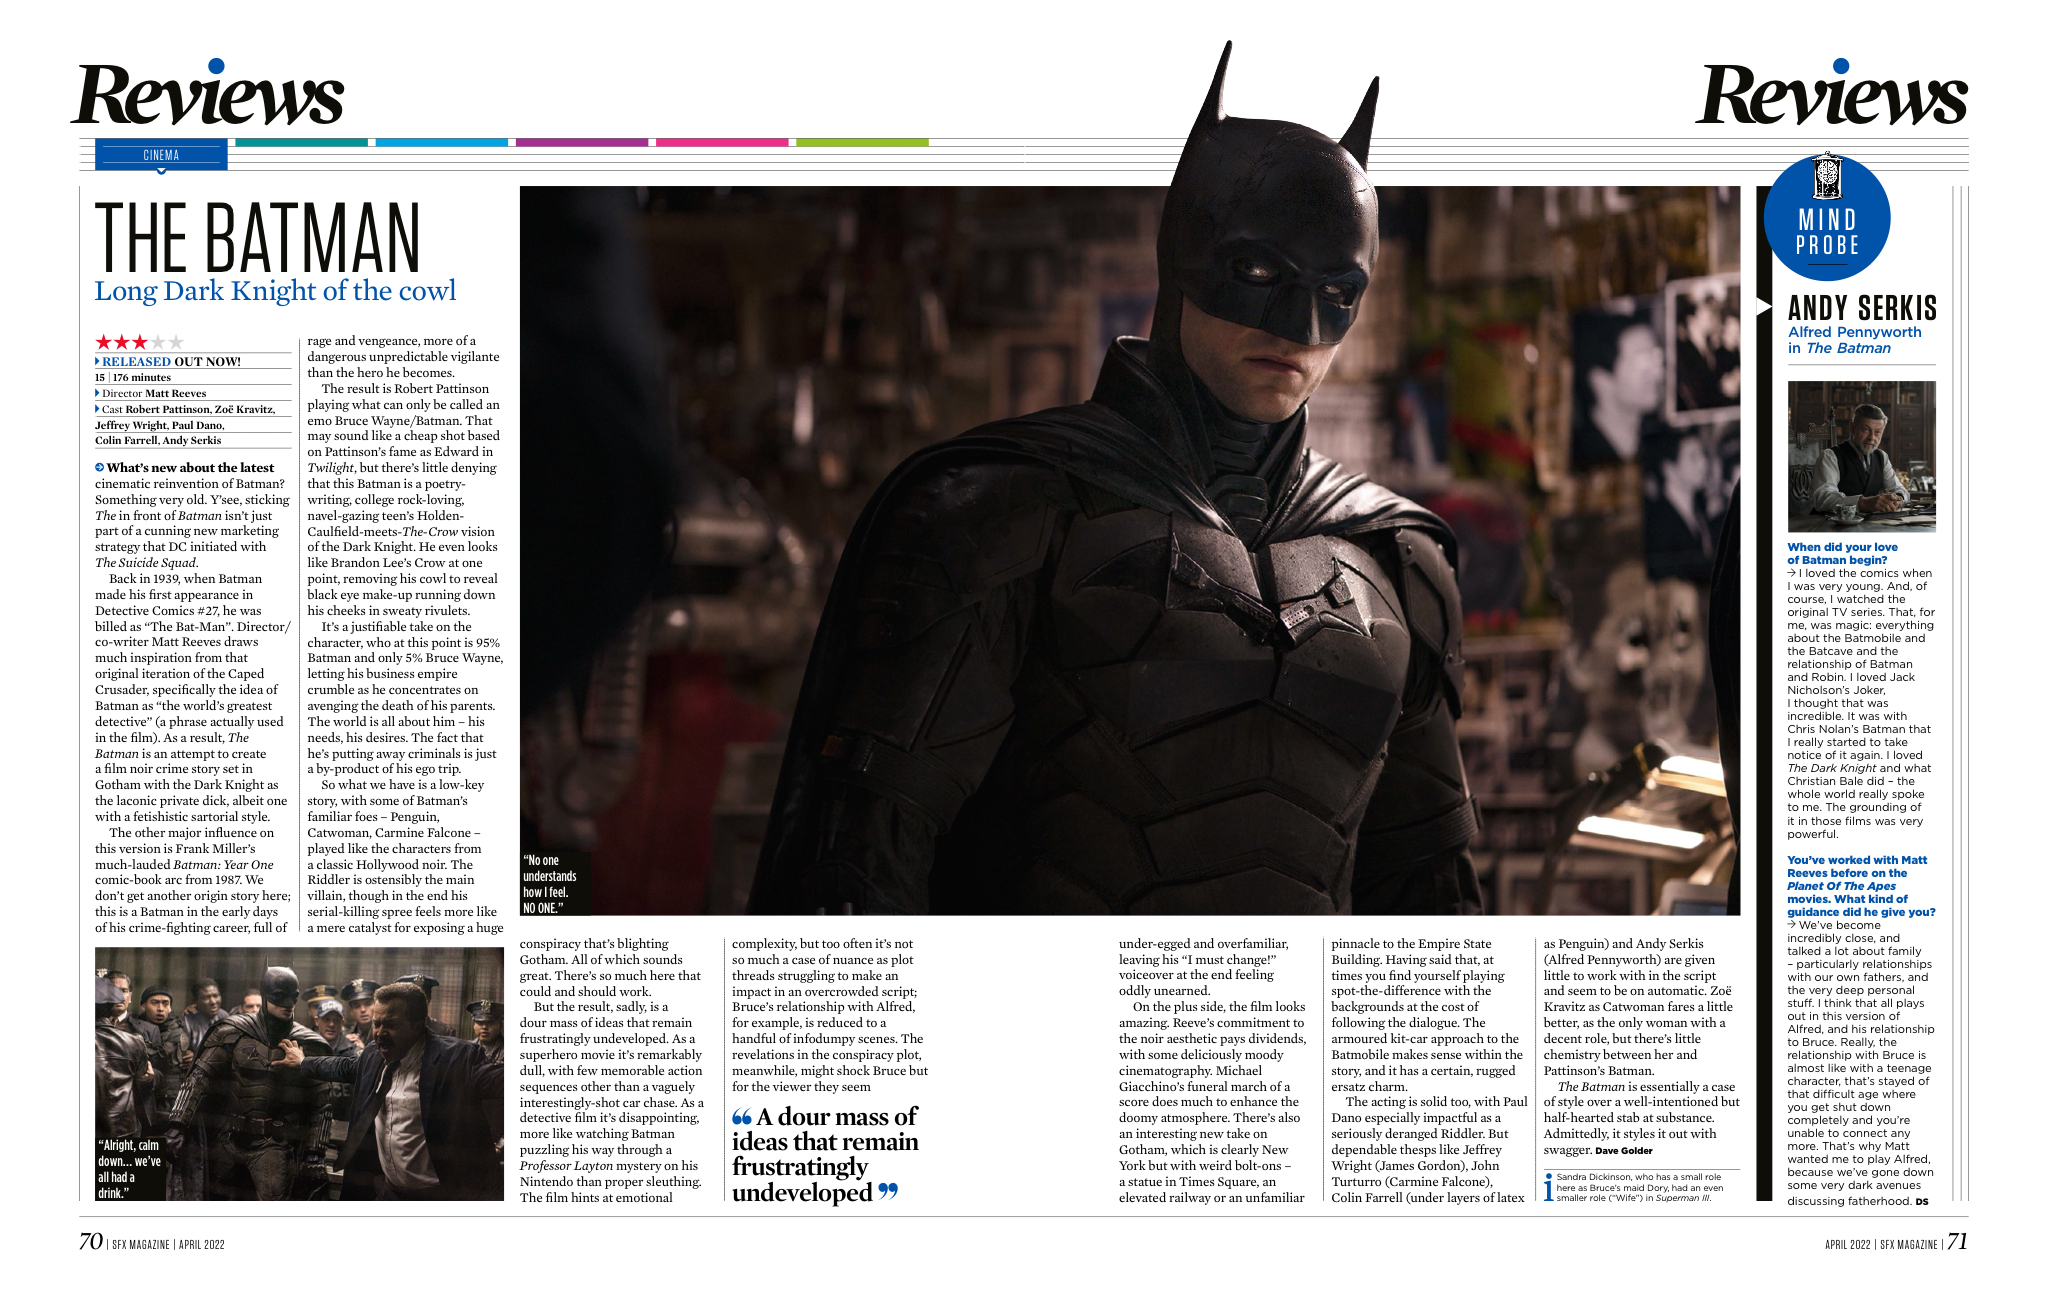 Review of The Batman in SFX issue #351.